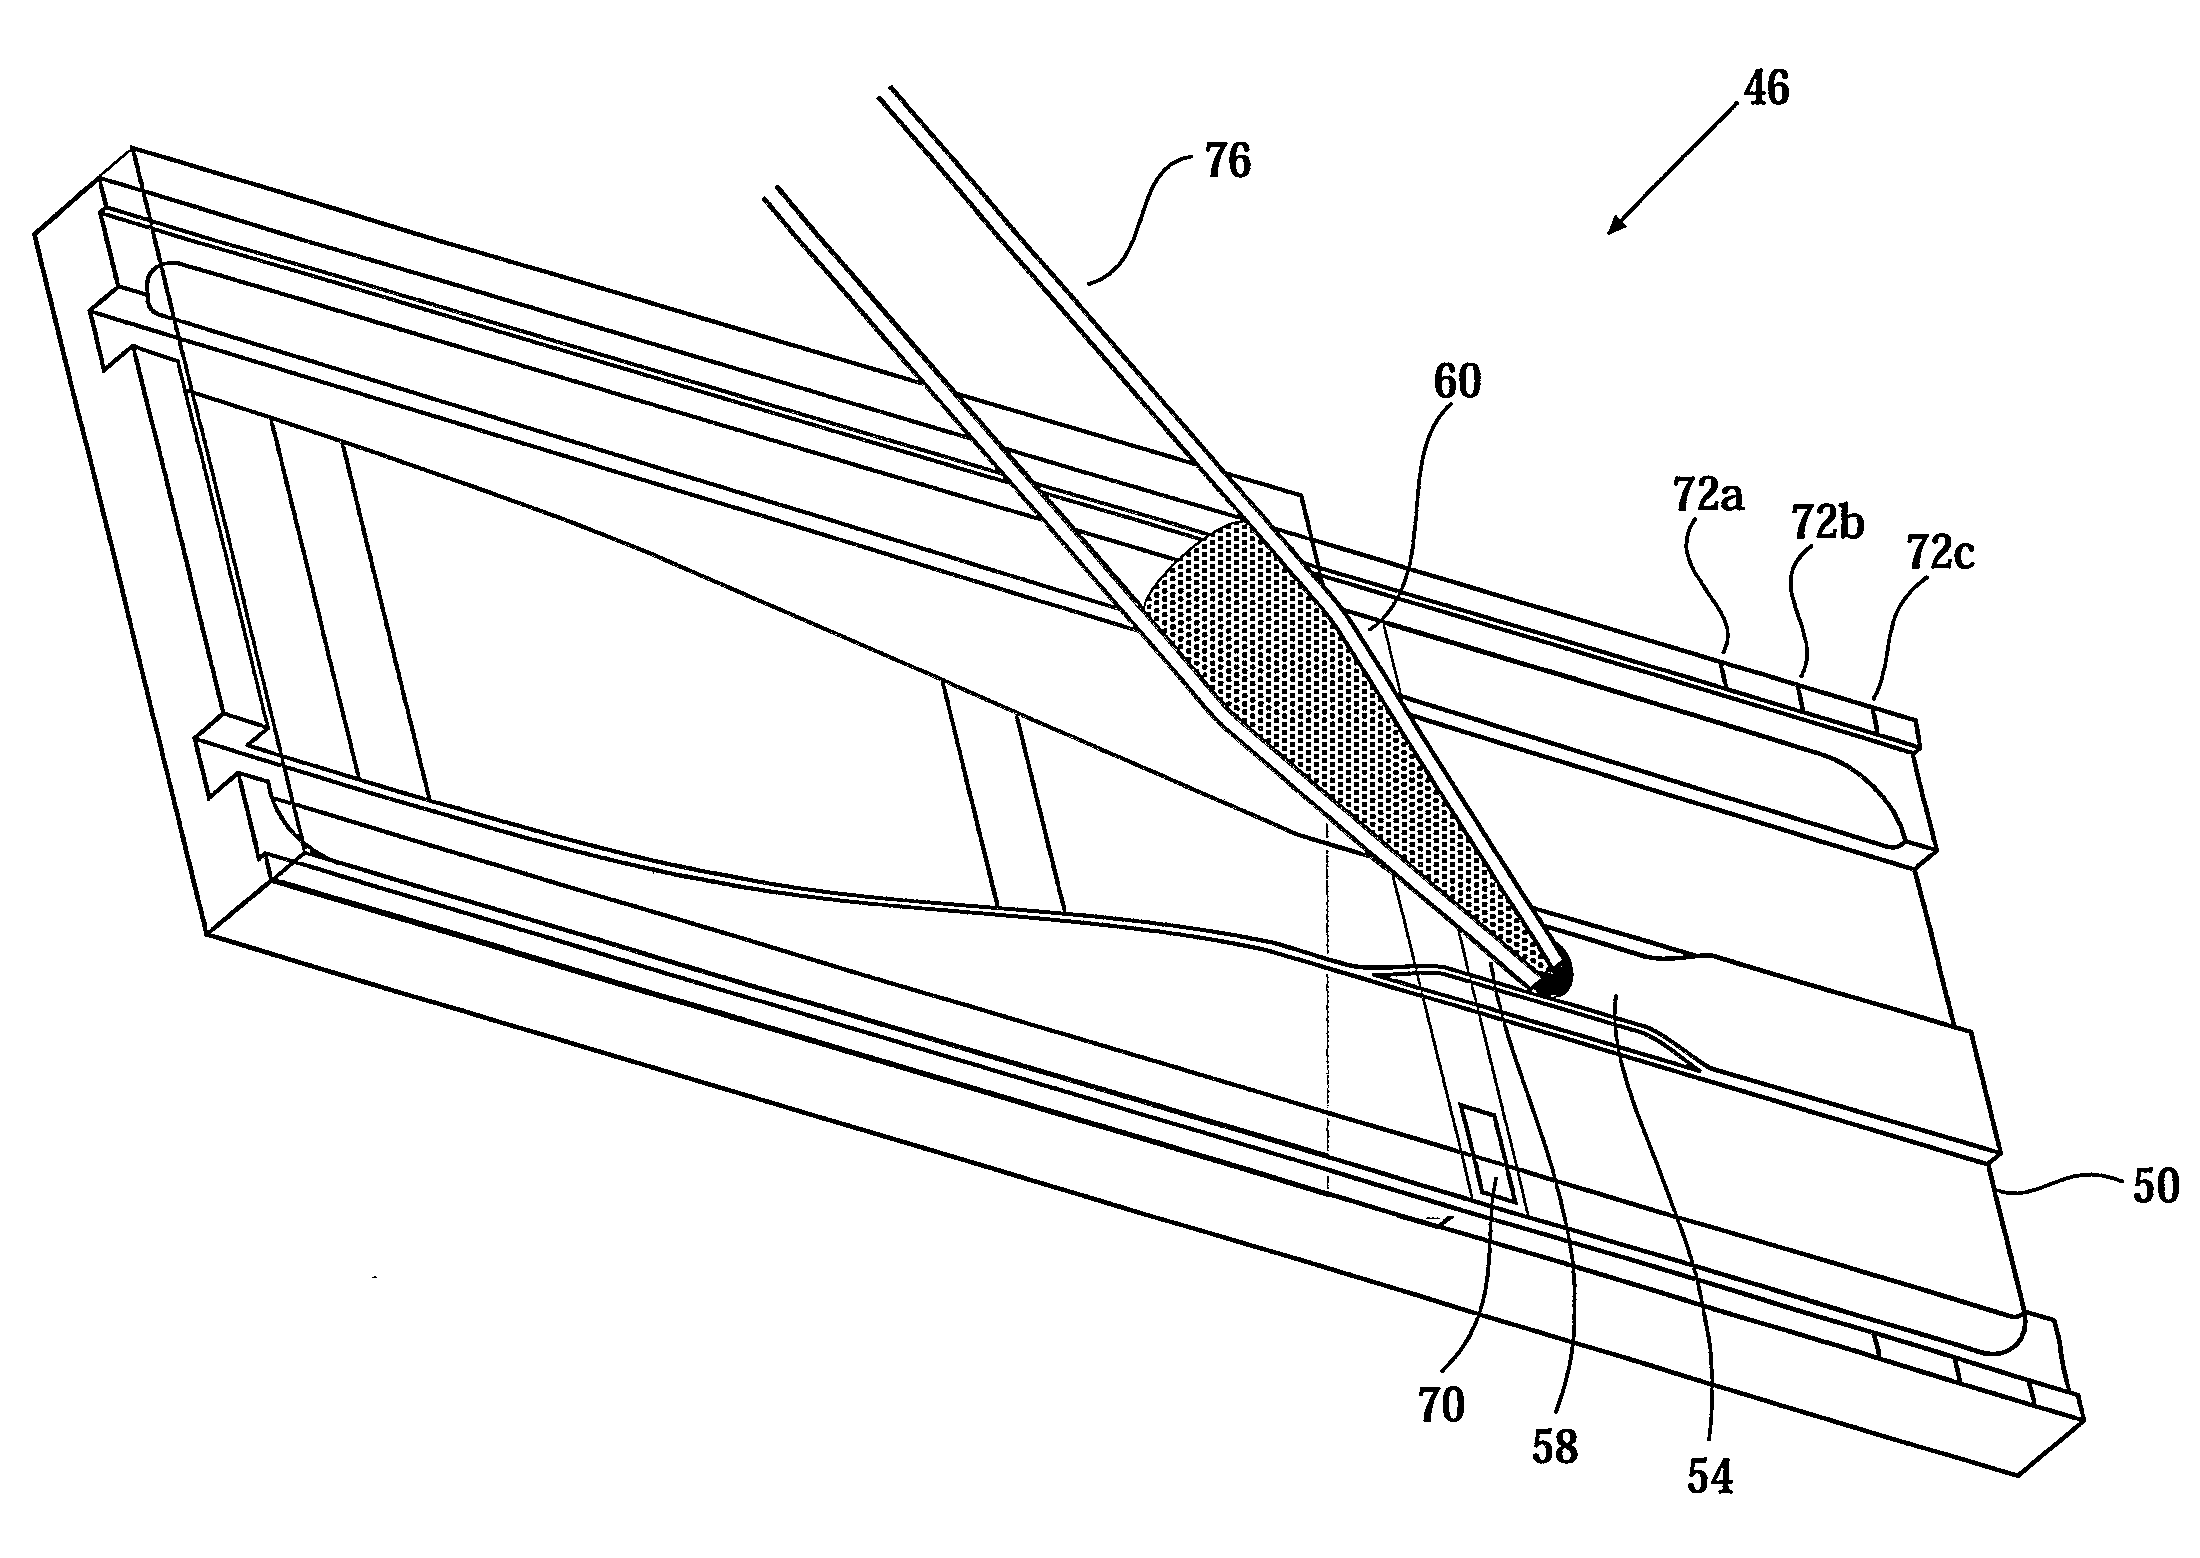 Device for Studying Individual Cells